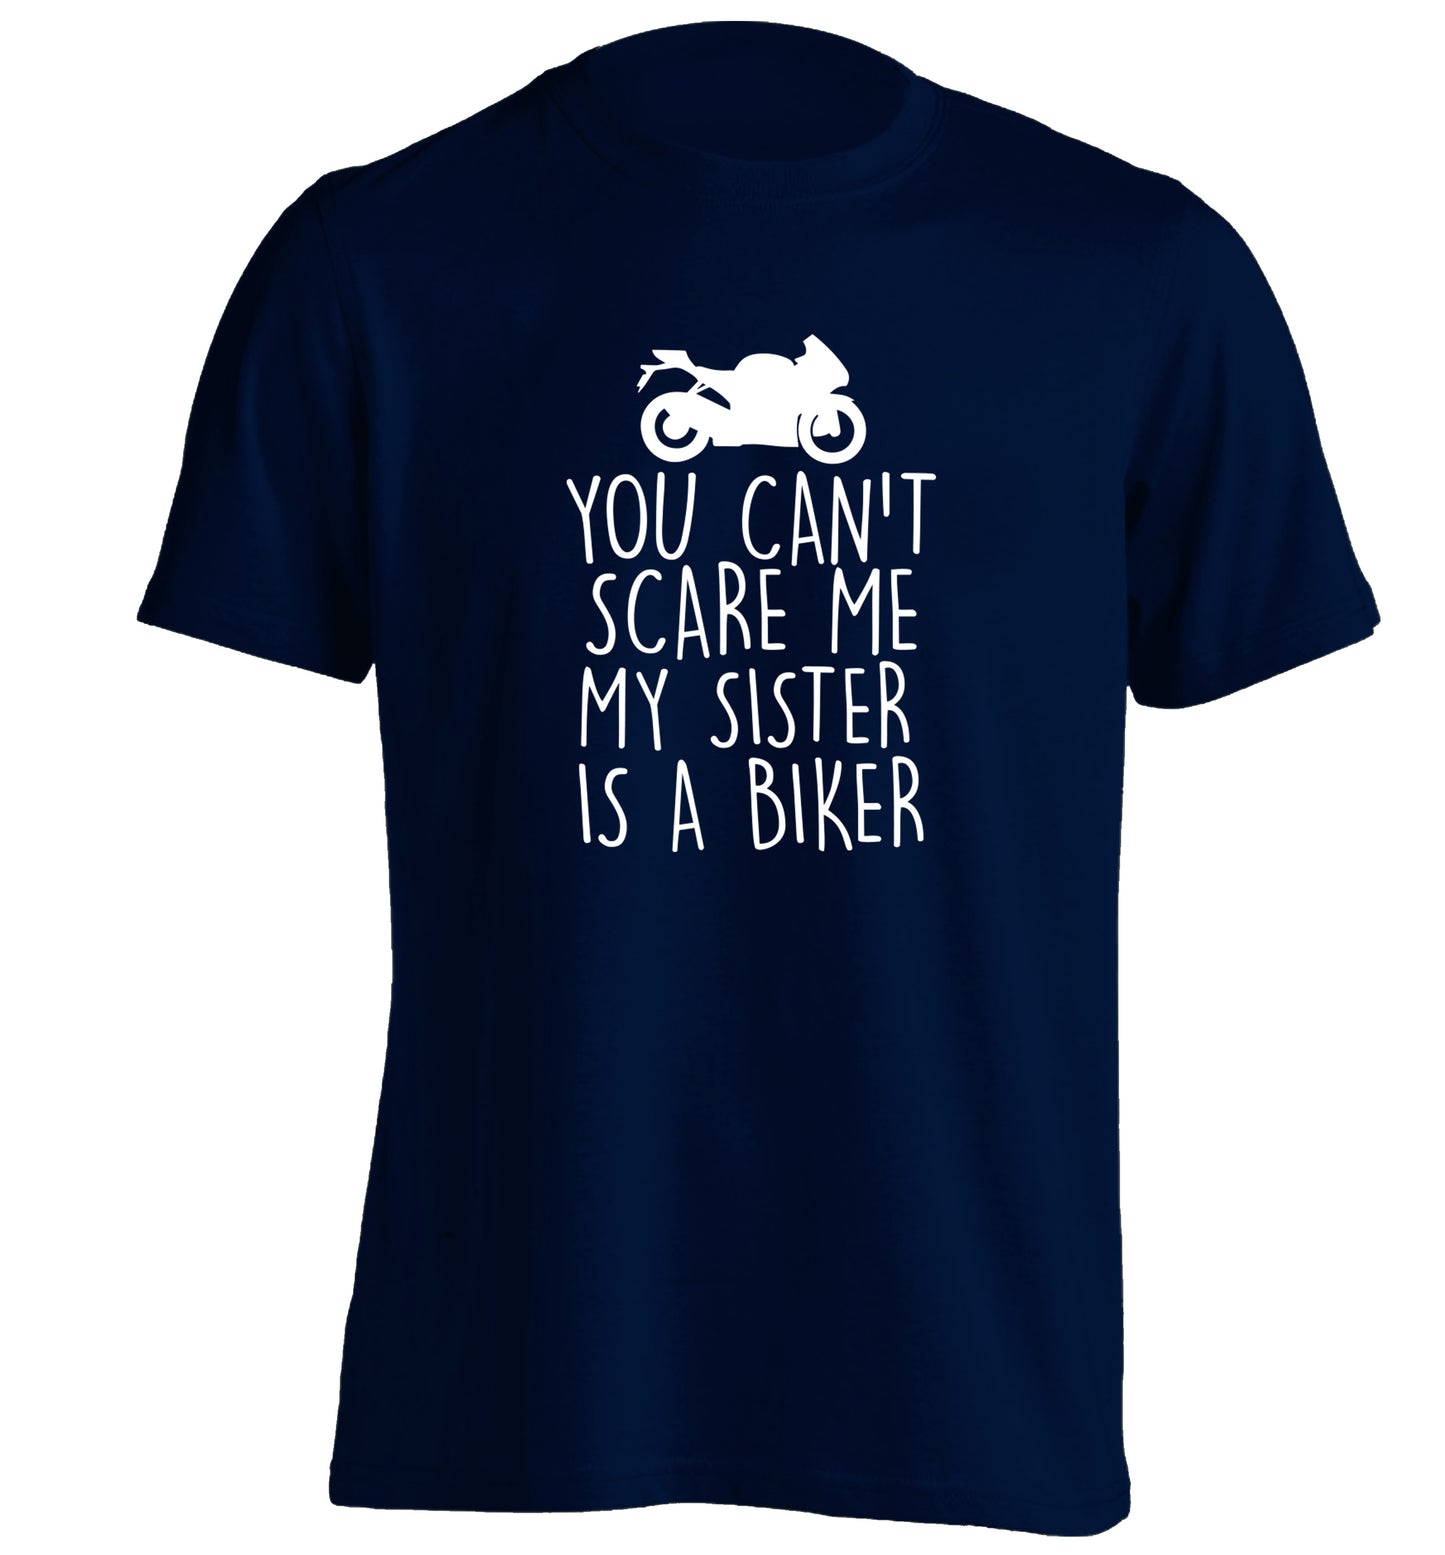 You can't scare me my sister is a biker adults unisex navy Tshirt 2XL